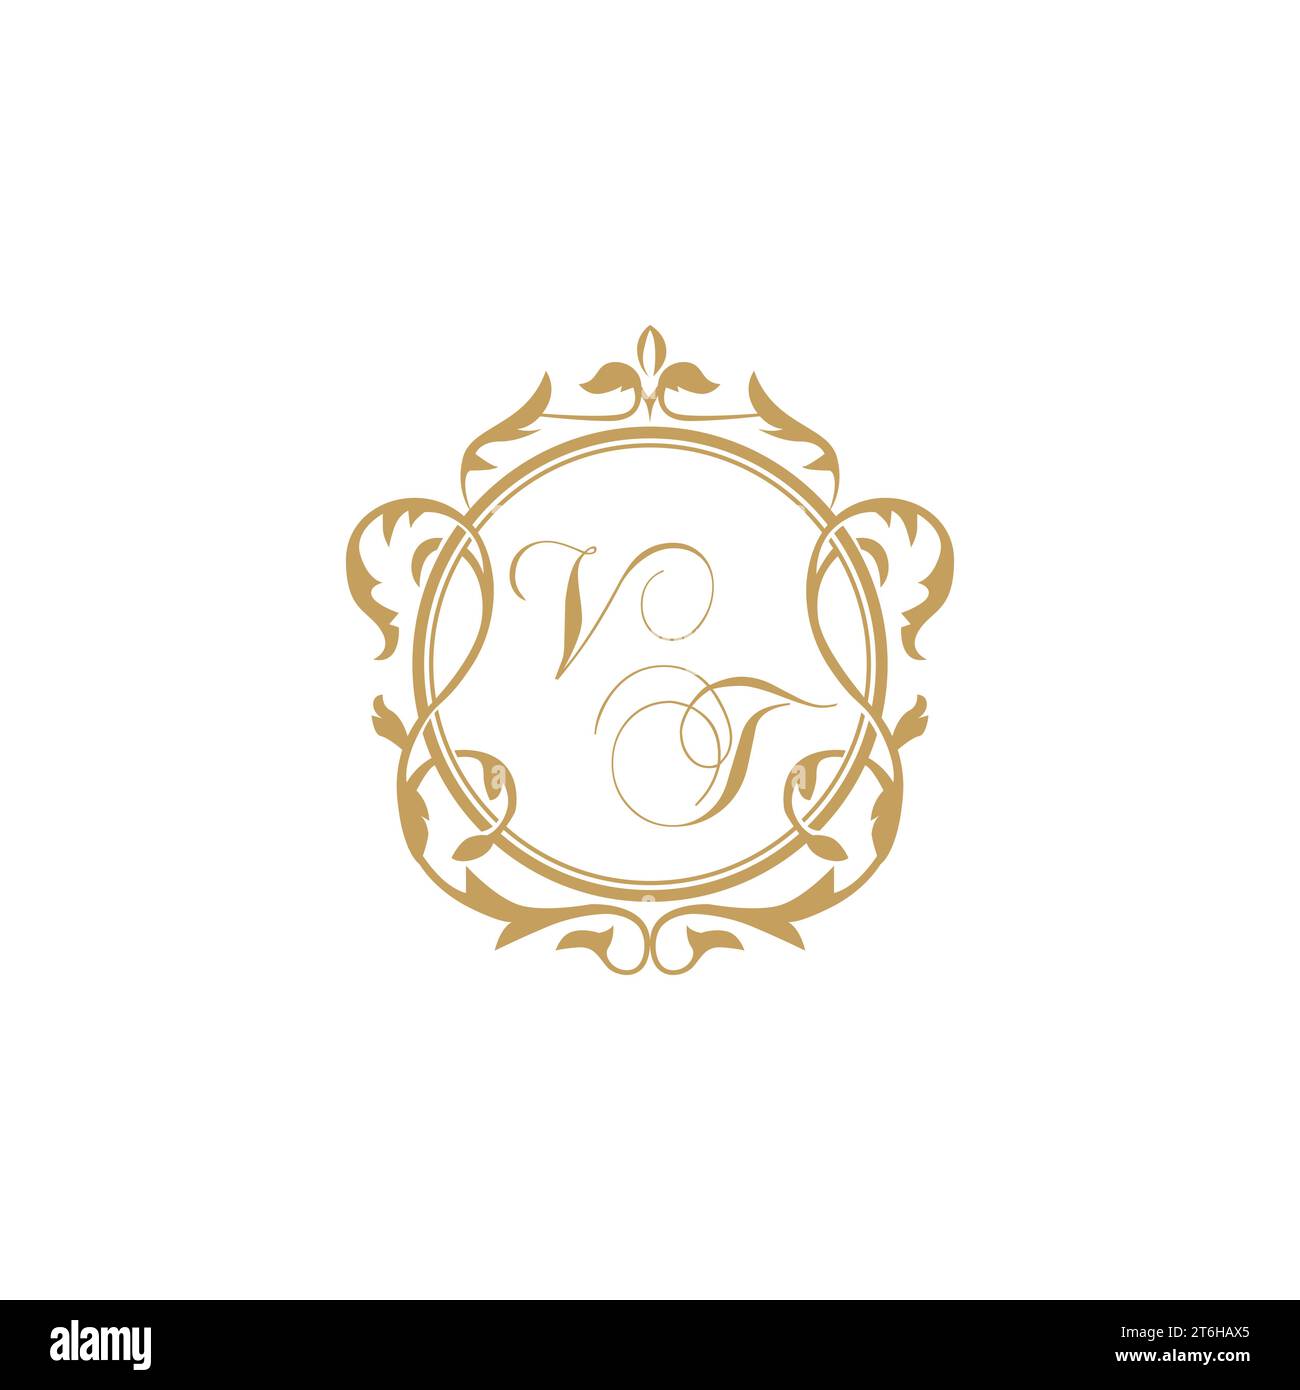 VT Wedding initial invitation with elegant ornament circle element vector graphic template Stock Vector